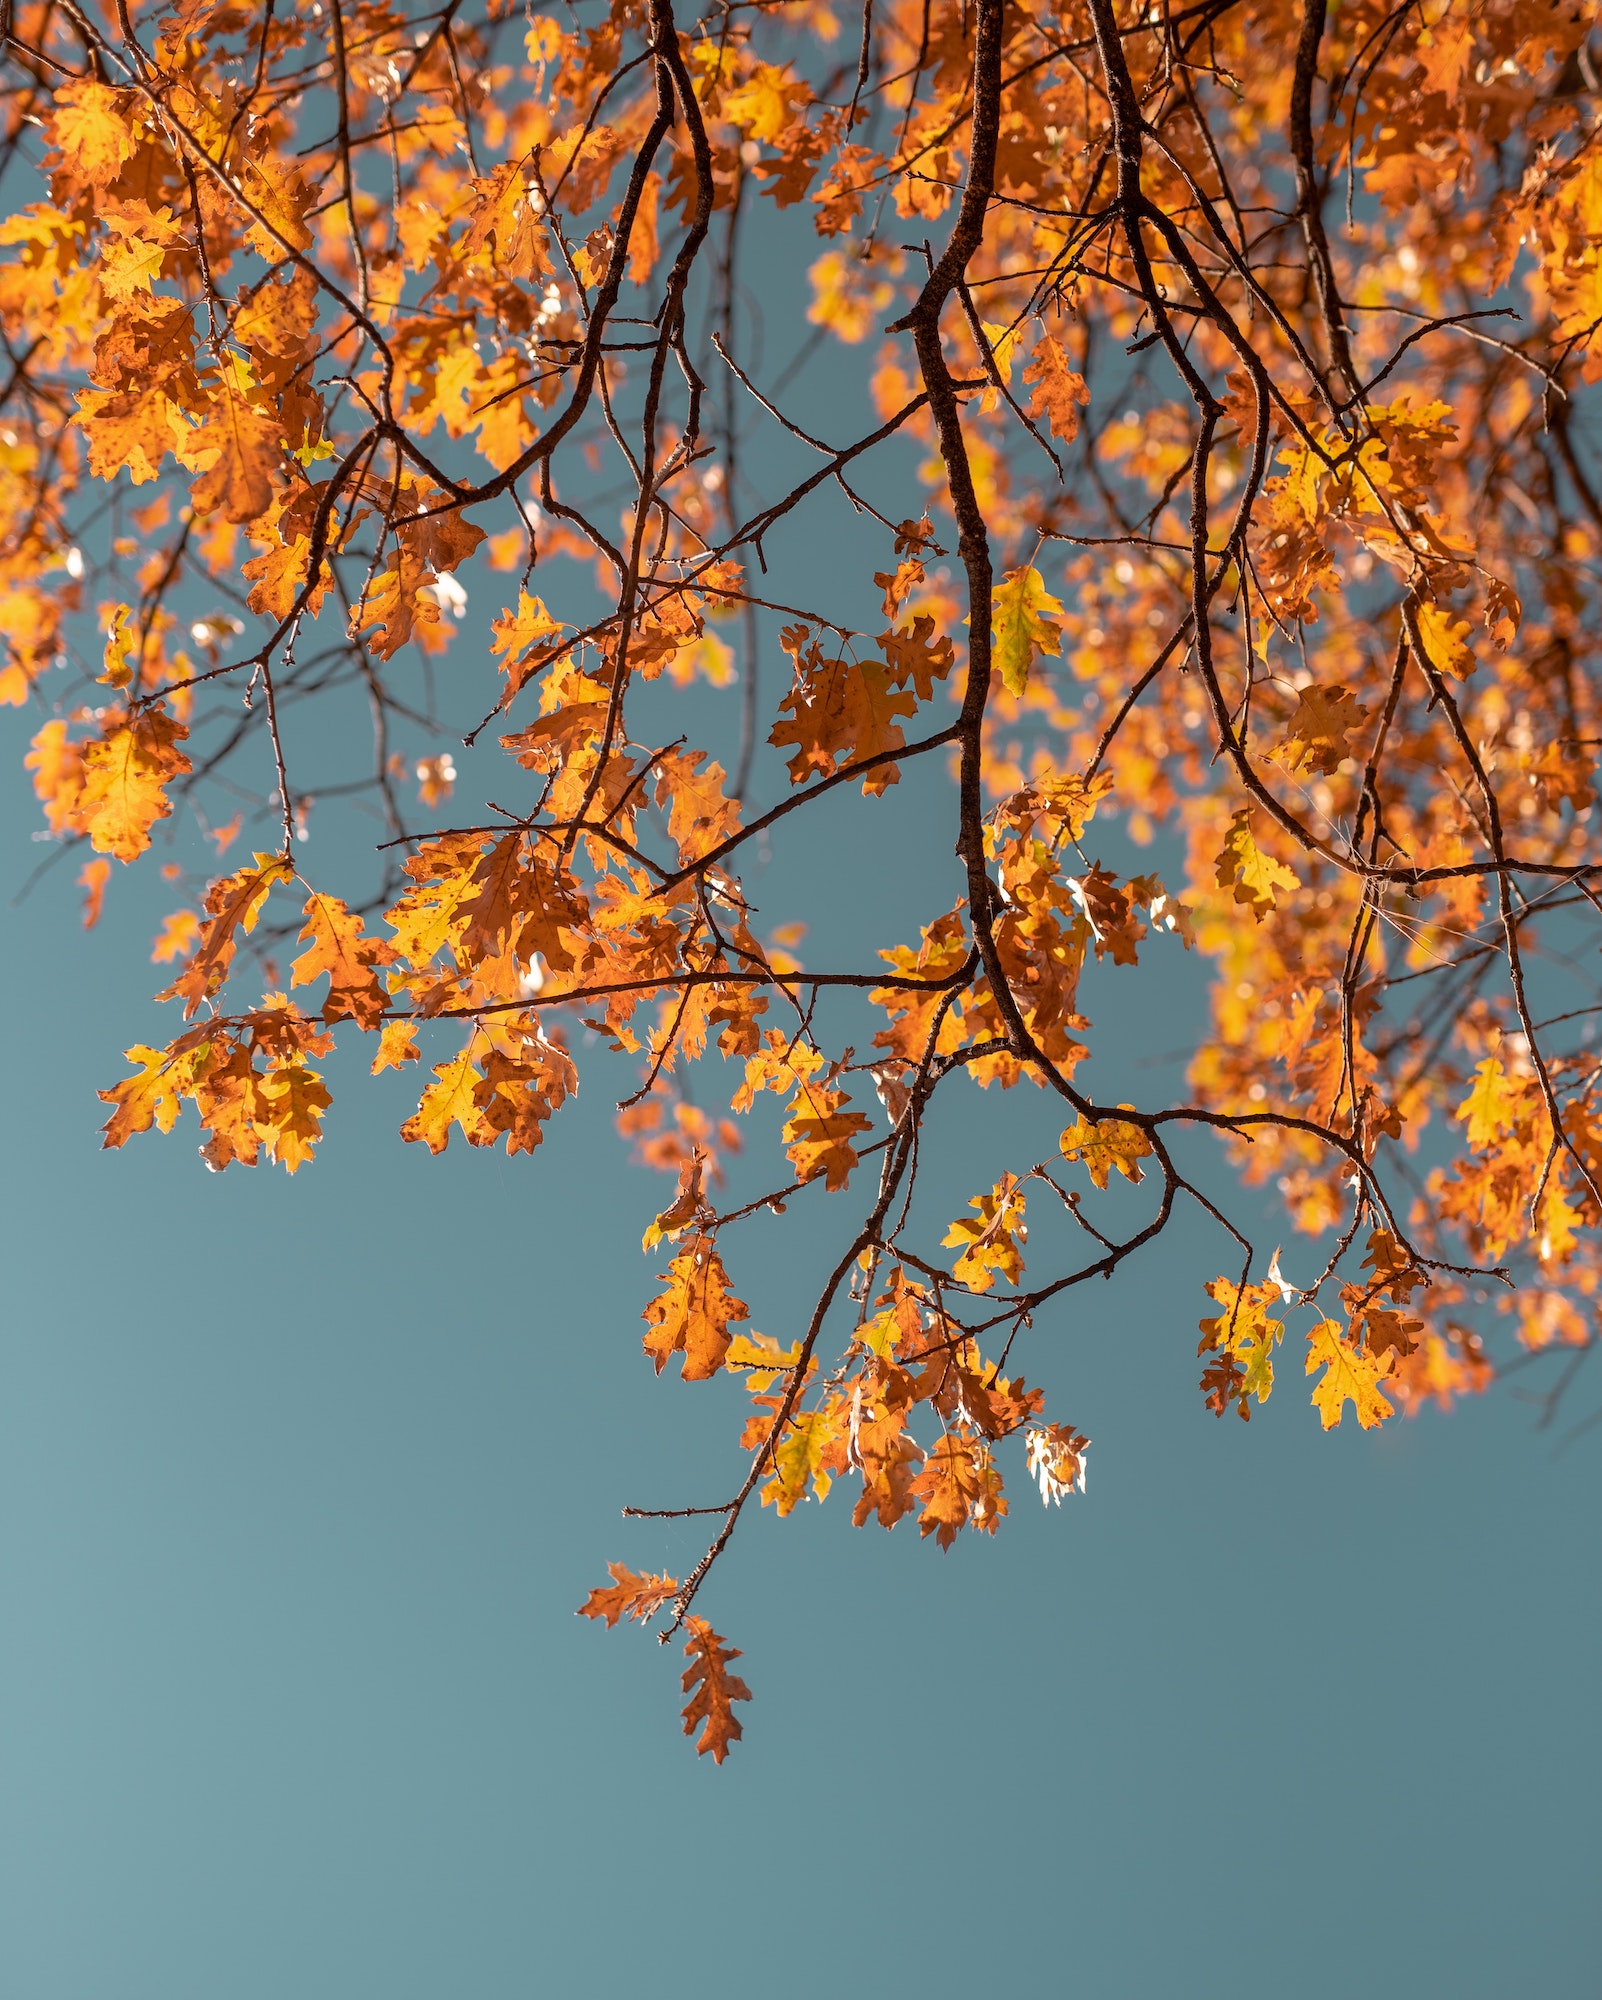 The Top Causes Of Personal Injury Accidents In Autumn